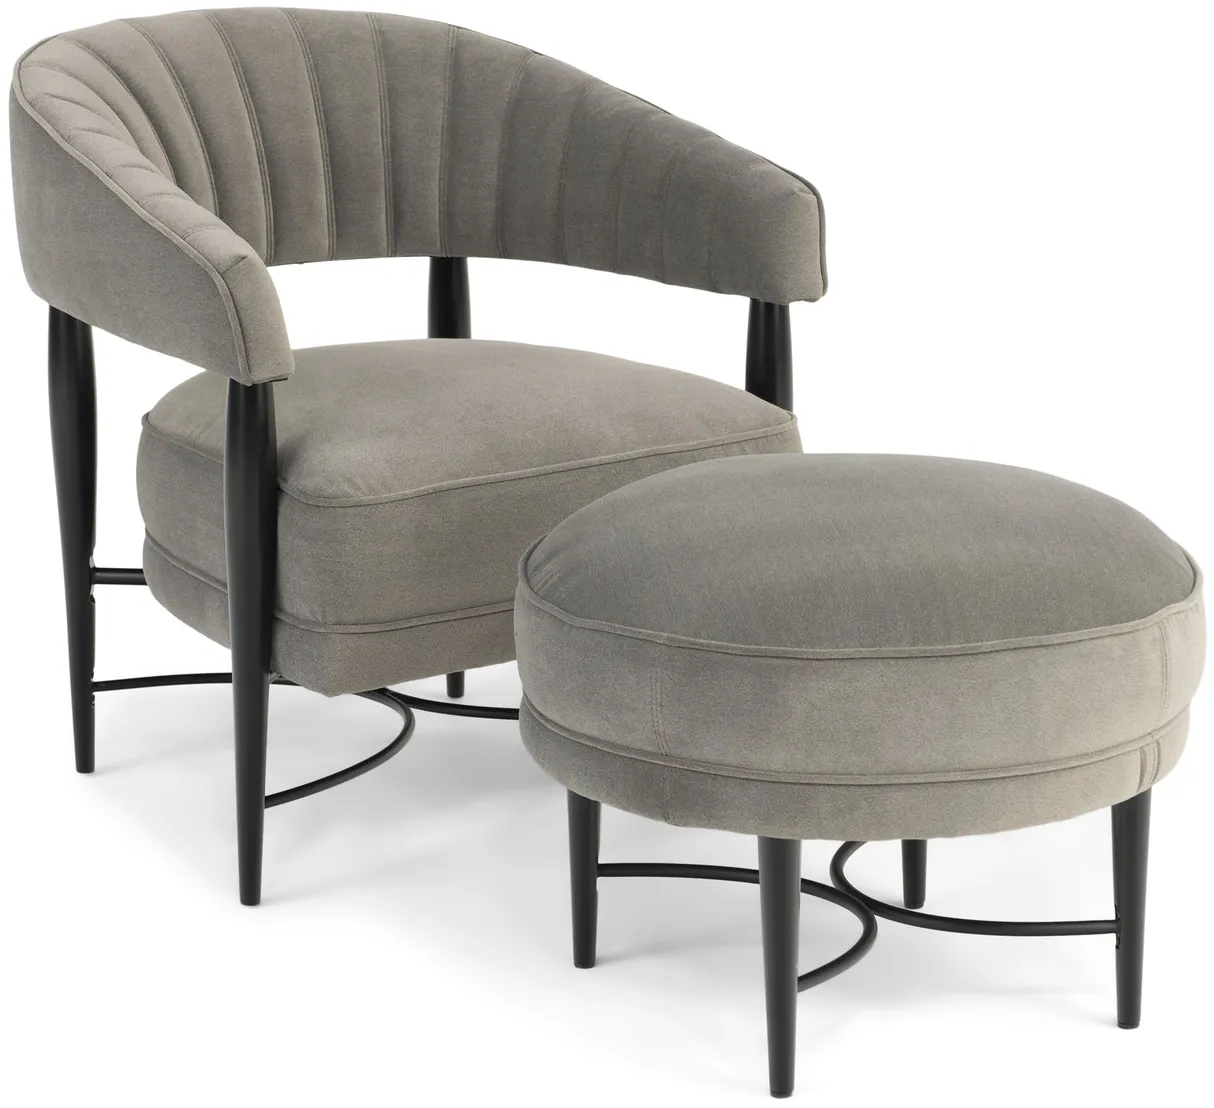 Gatsby Chair With Ottoman